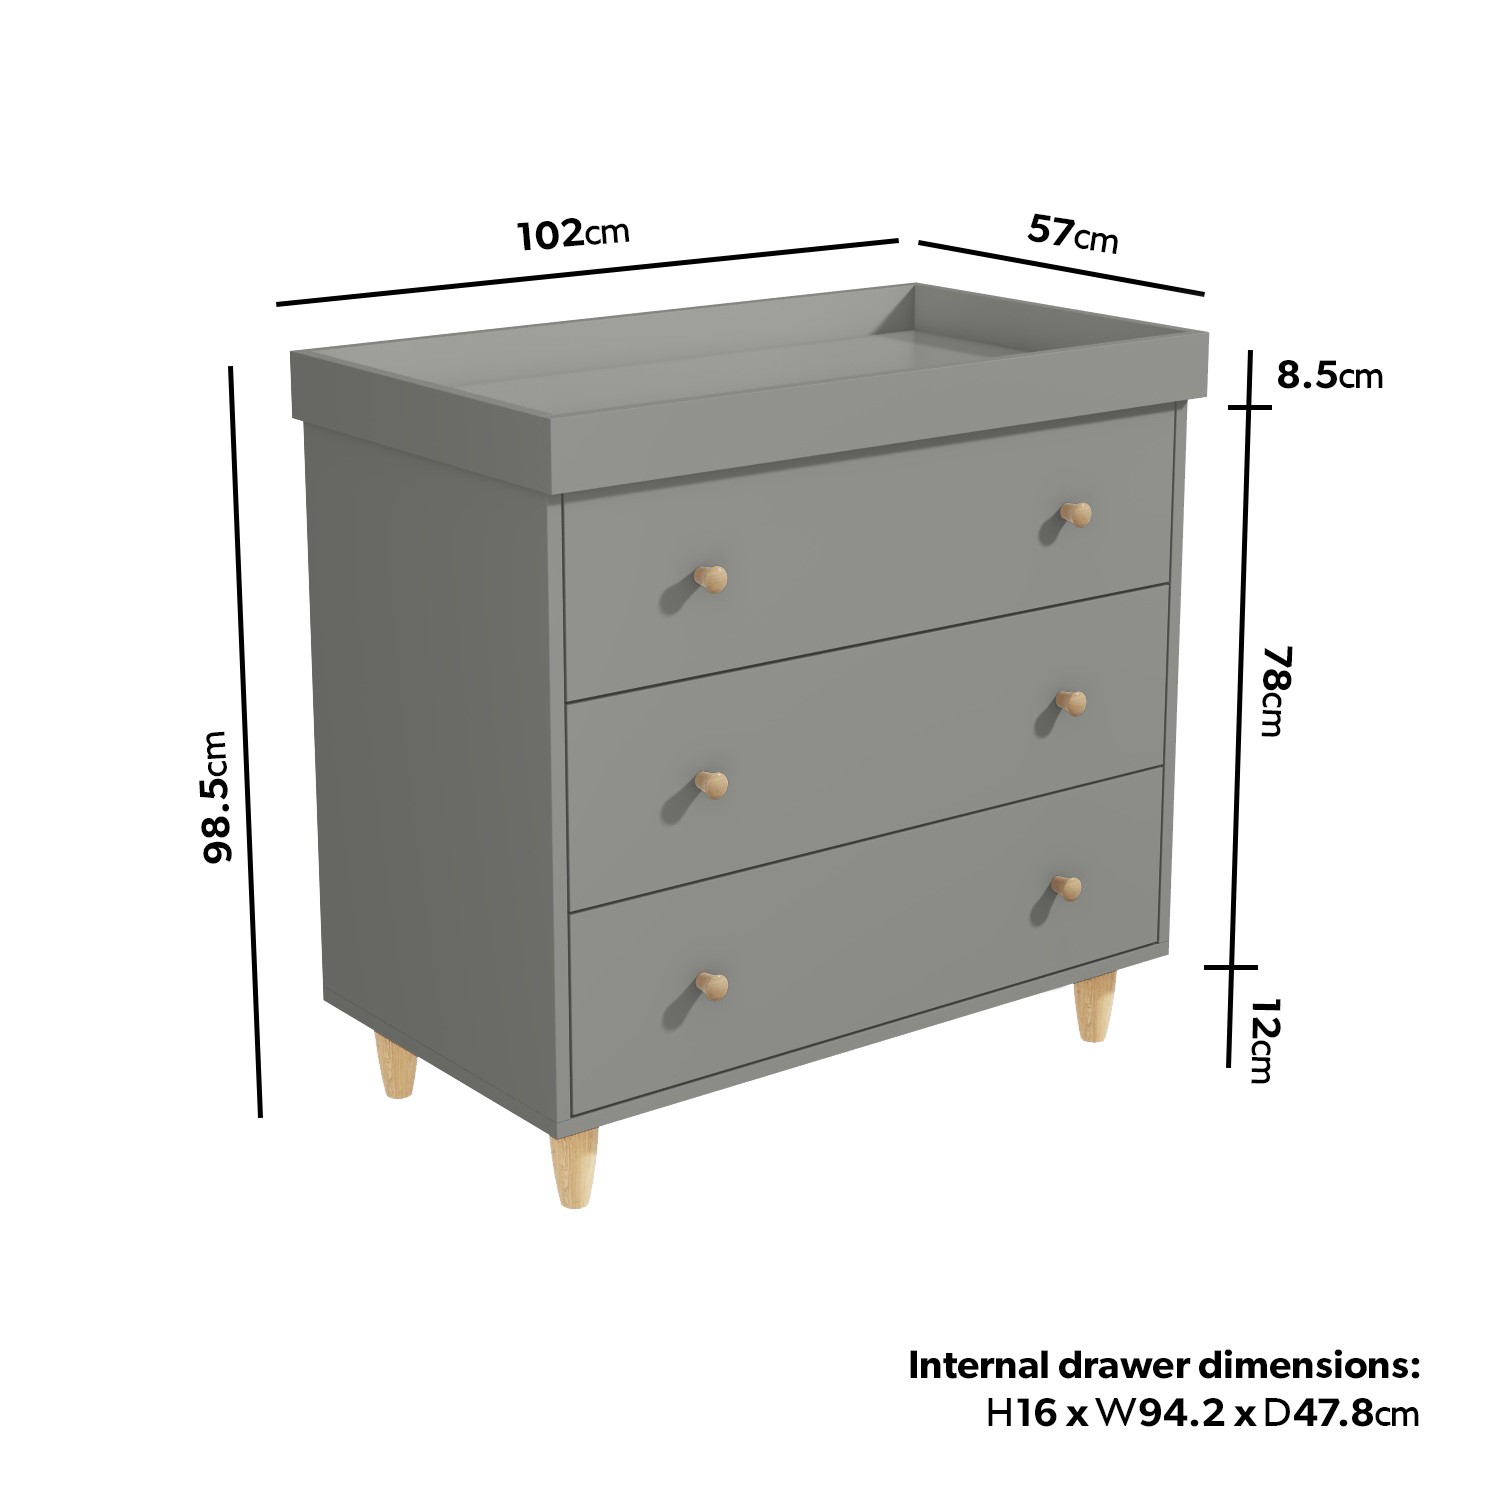 AIEGLE Modern Wood Nursery Storage Dresser Chest with Changing Table Top 3 Drawer Grey, 35.4 W x 19.5 D x 30.9 H Wide Storage Space Functional Organizer 